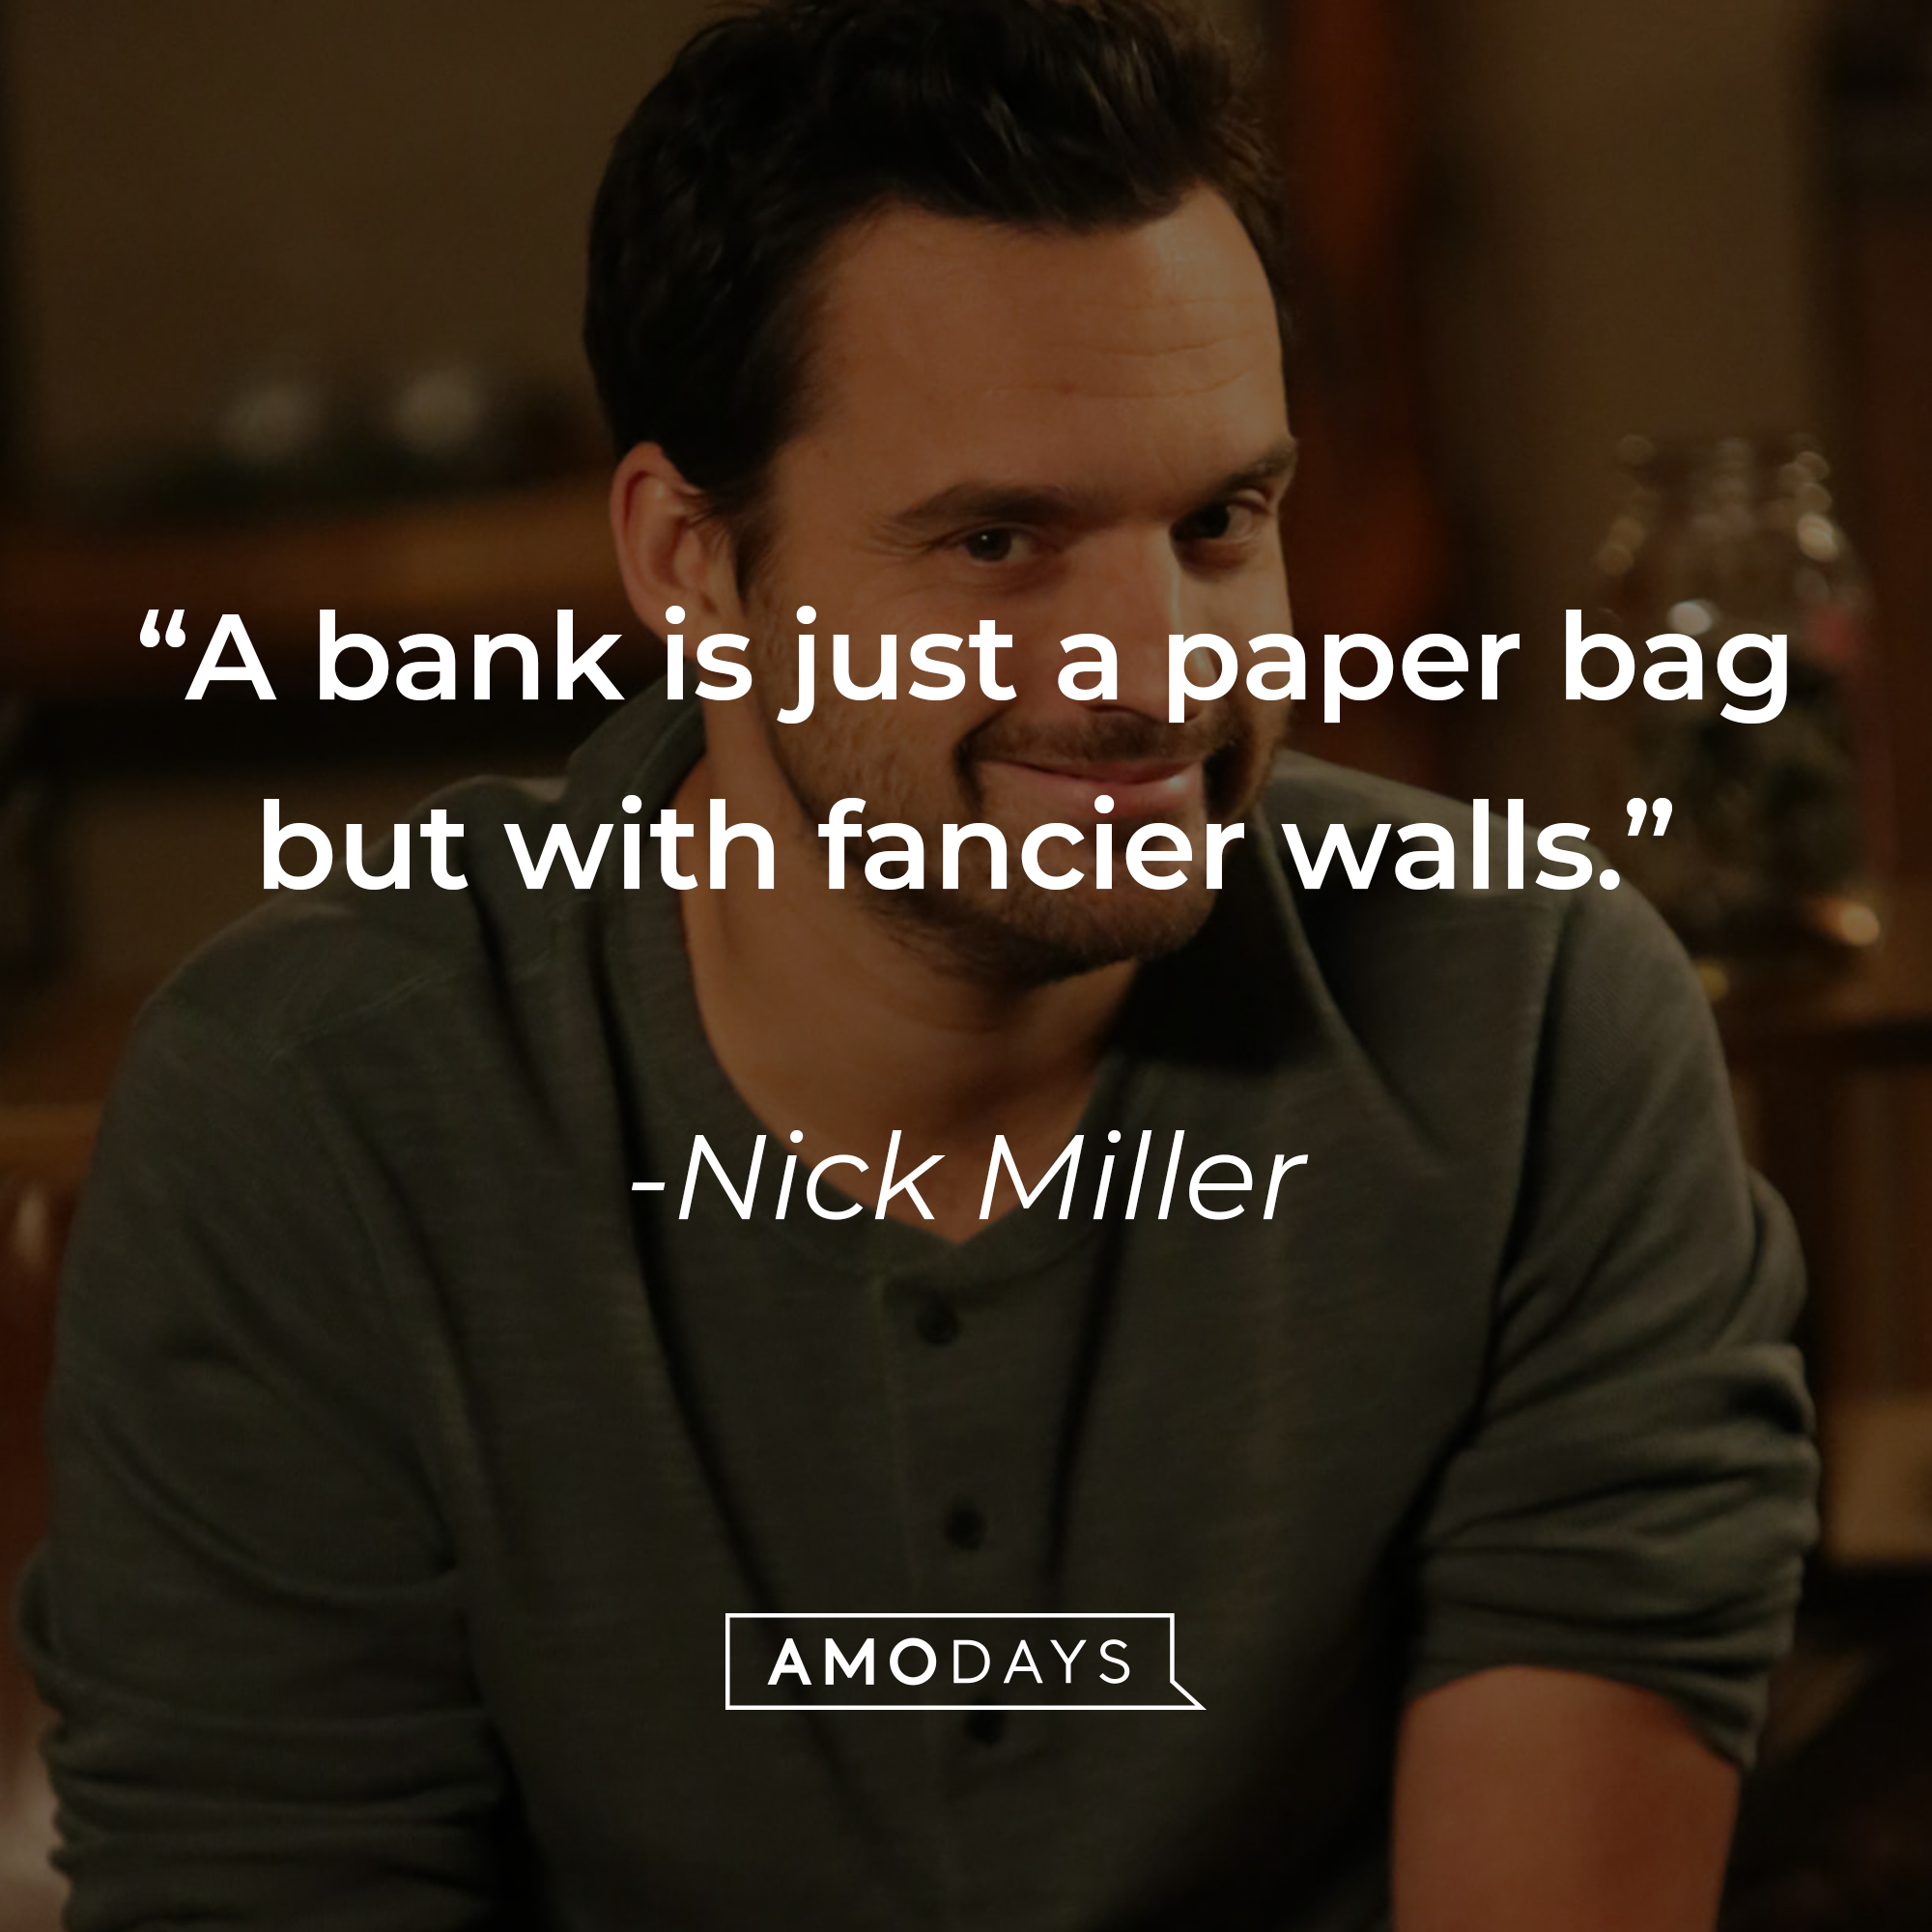 Nick Miller, with his quote: “A bank is just a paper bag but with fancier walls.” | Source: facebook.com/OfficialNewGirl